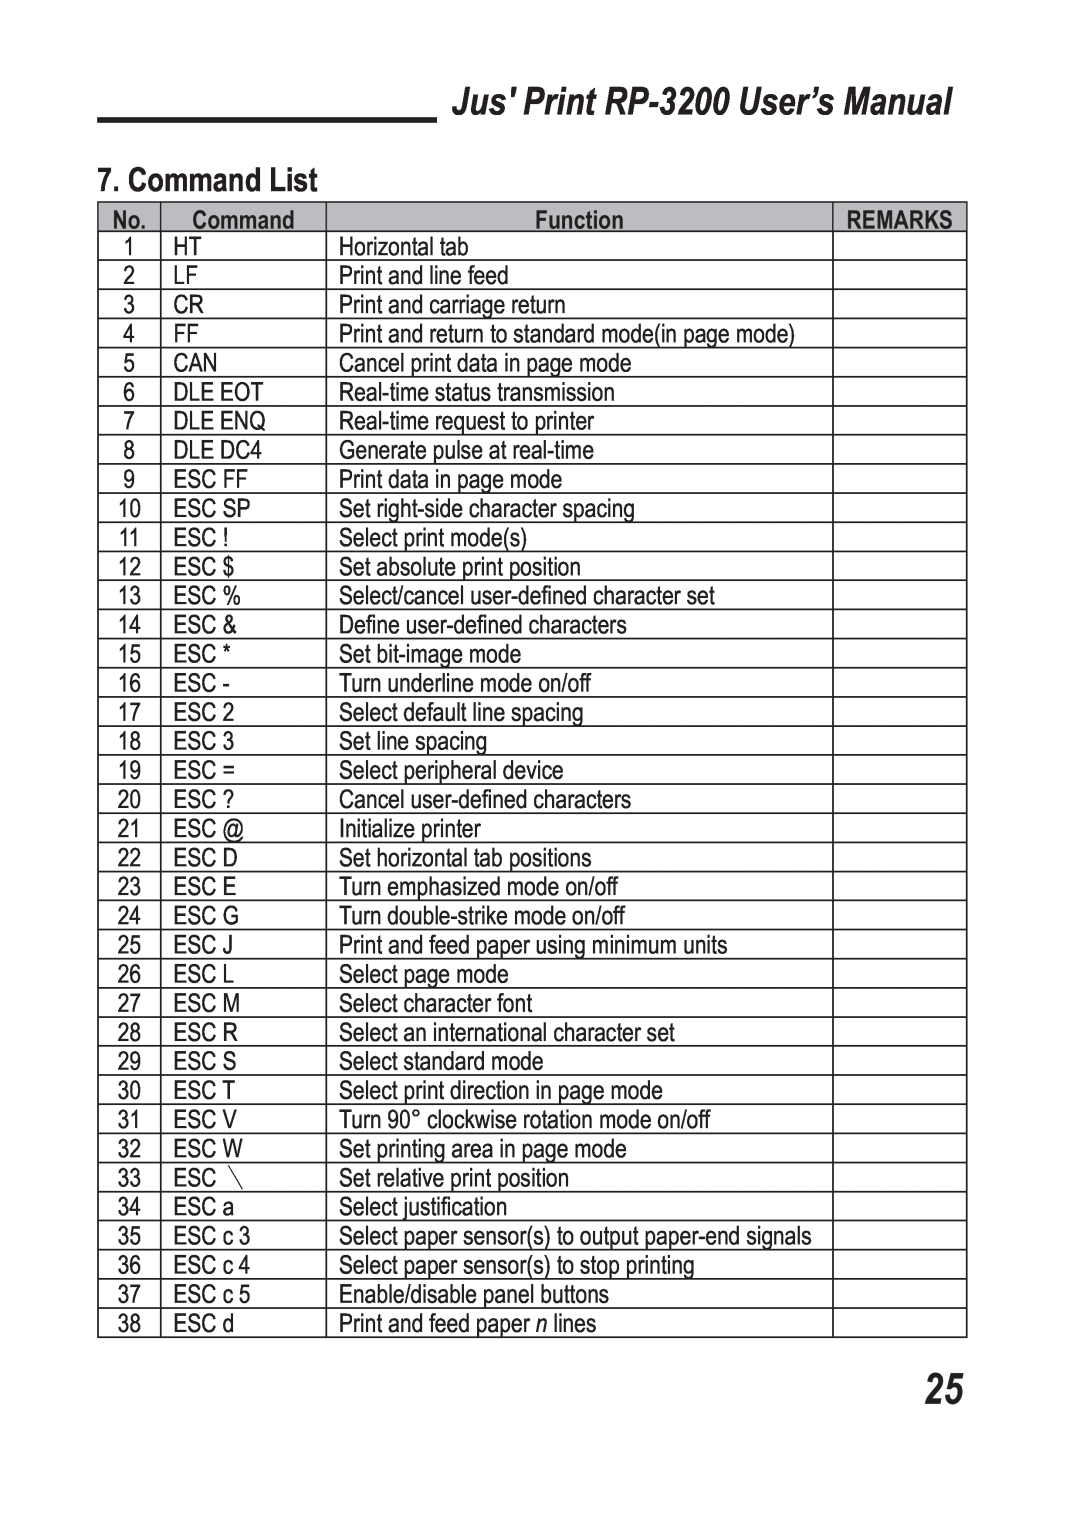 TVS electronic specifications Command List, Jus Print RP-3200 User’s Manual, Function, Remarks 